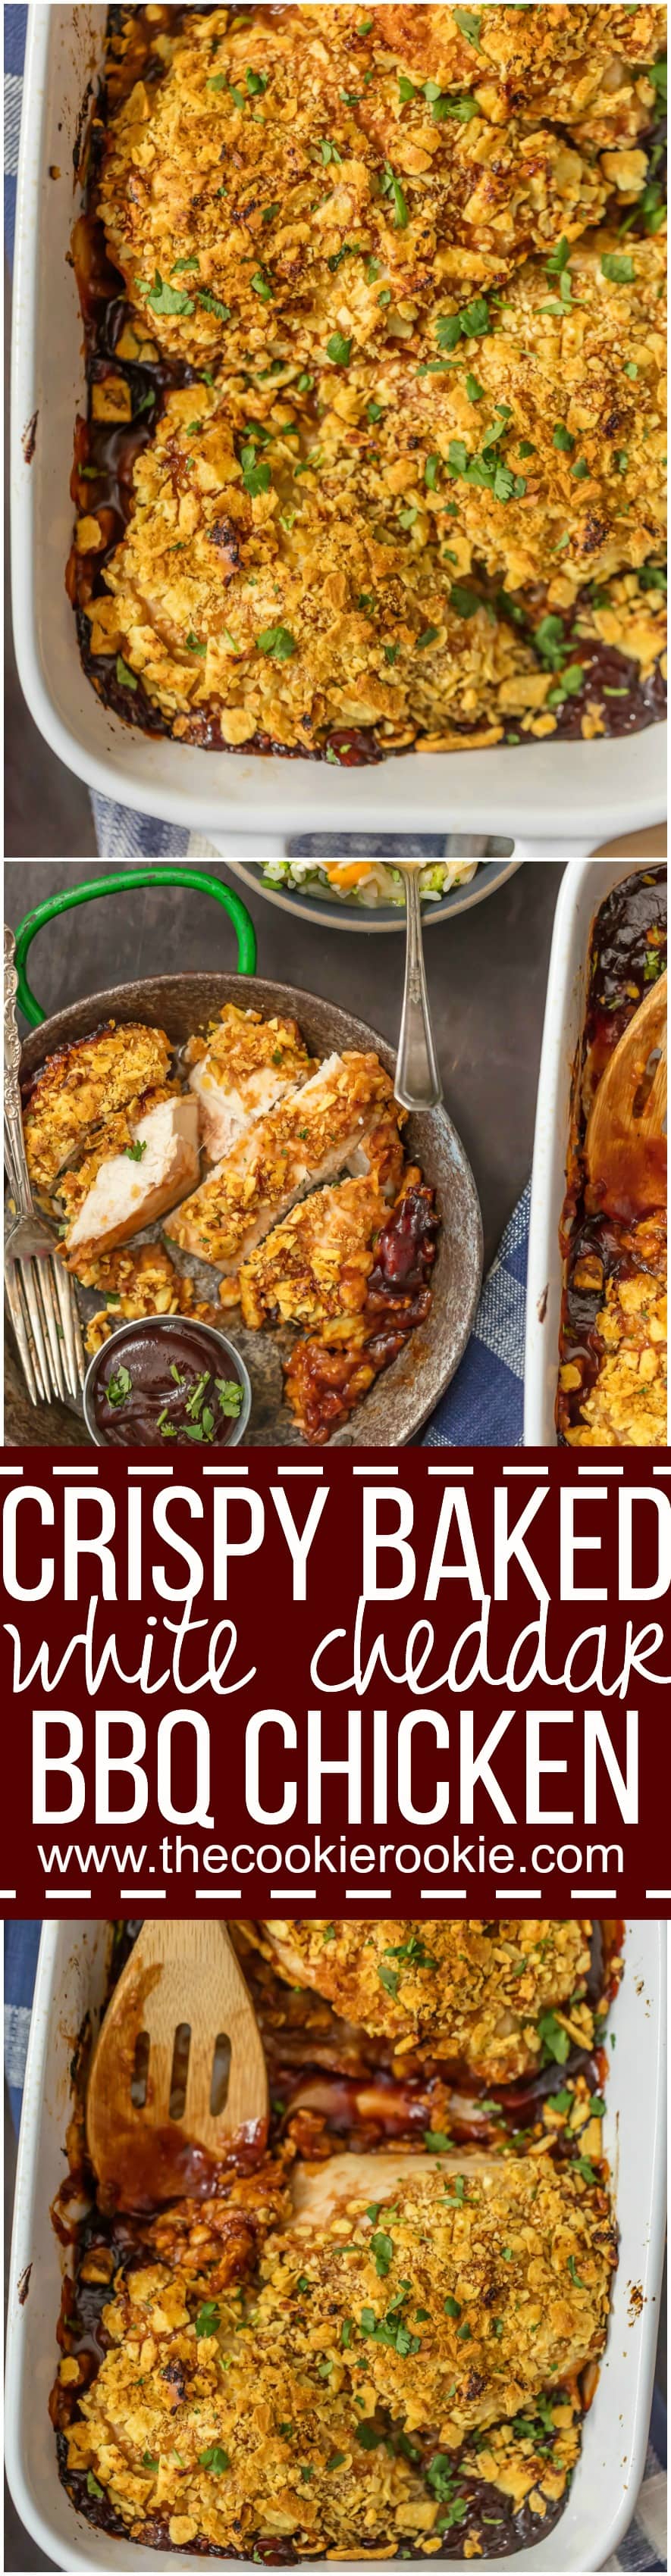 This CRISPY BAKED WHITE CHEDDAR BBQ CHICKEN only has 3 ingredients and so much flavor! So simple to make and sure to please the entire family. This is our go-to easy dinner recipe!